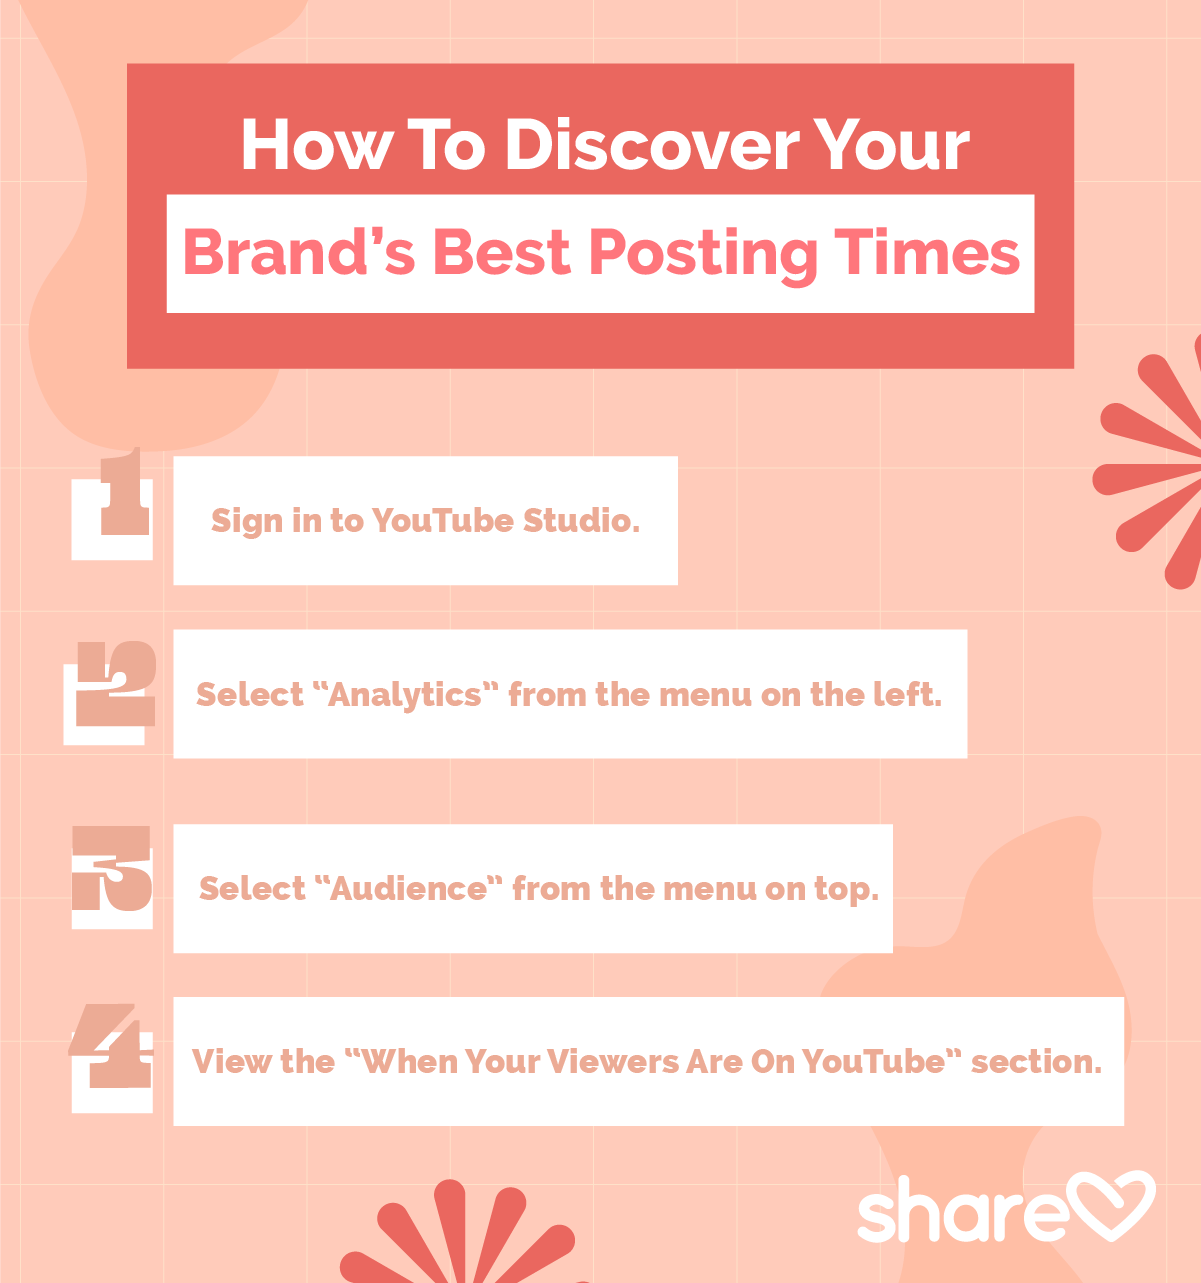 How to Discover Your Brand's Best Posting Times